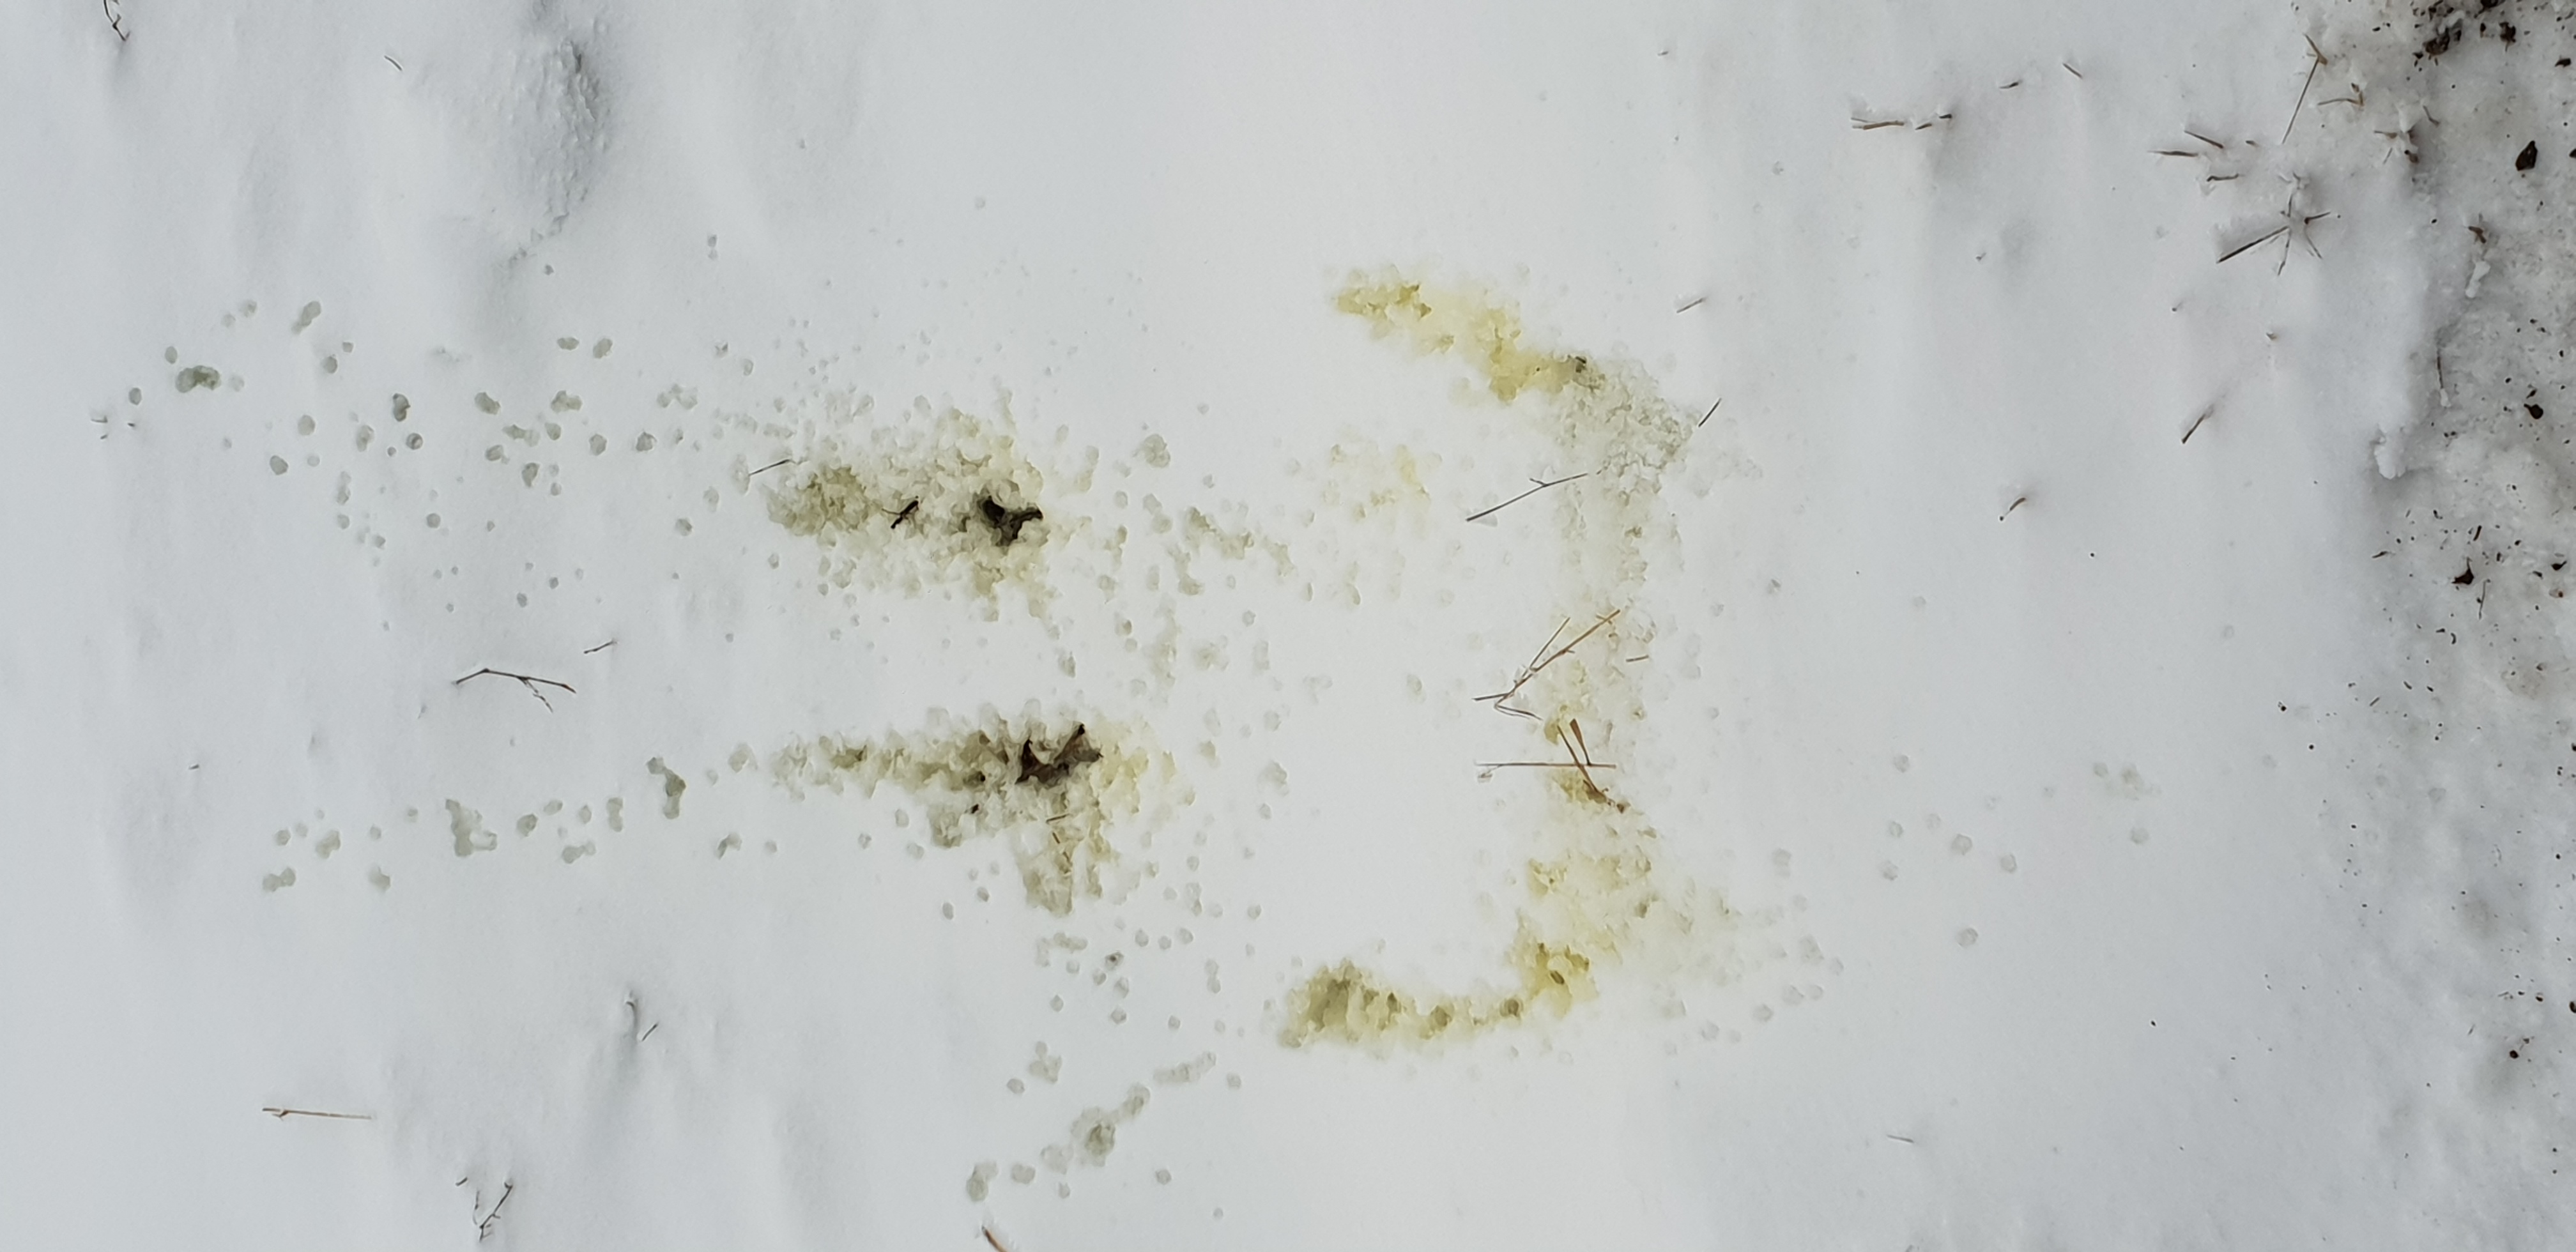 Pee a Smiley in the Snow